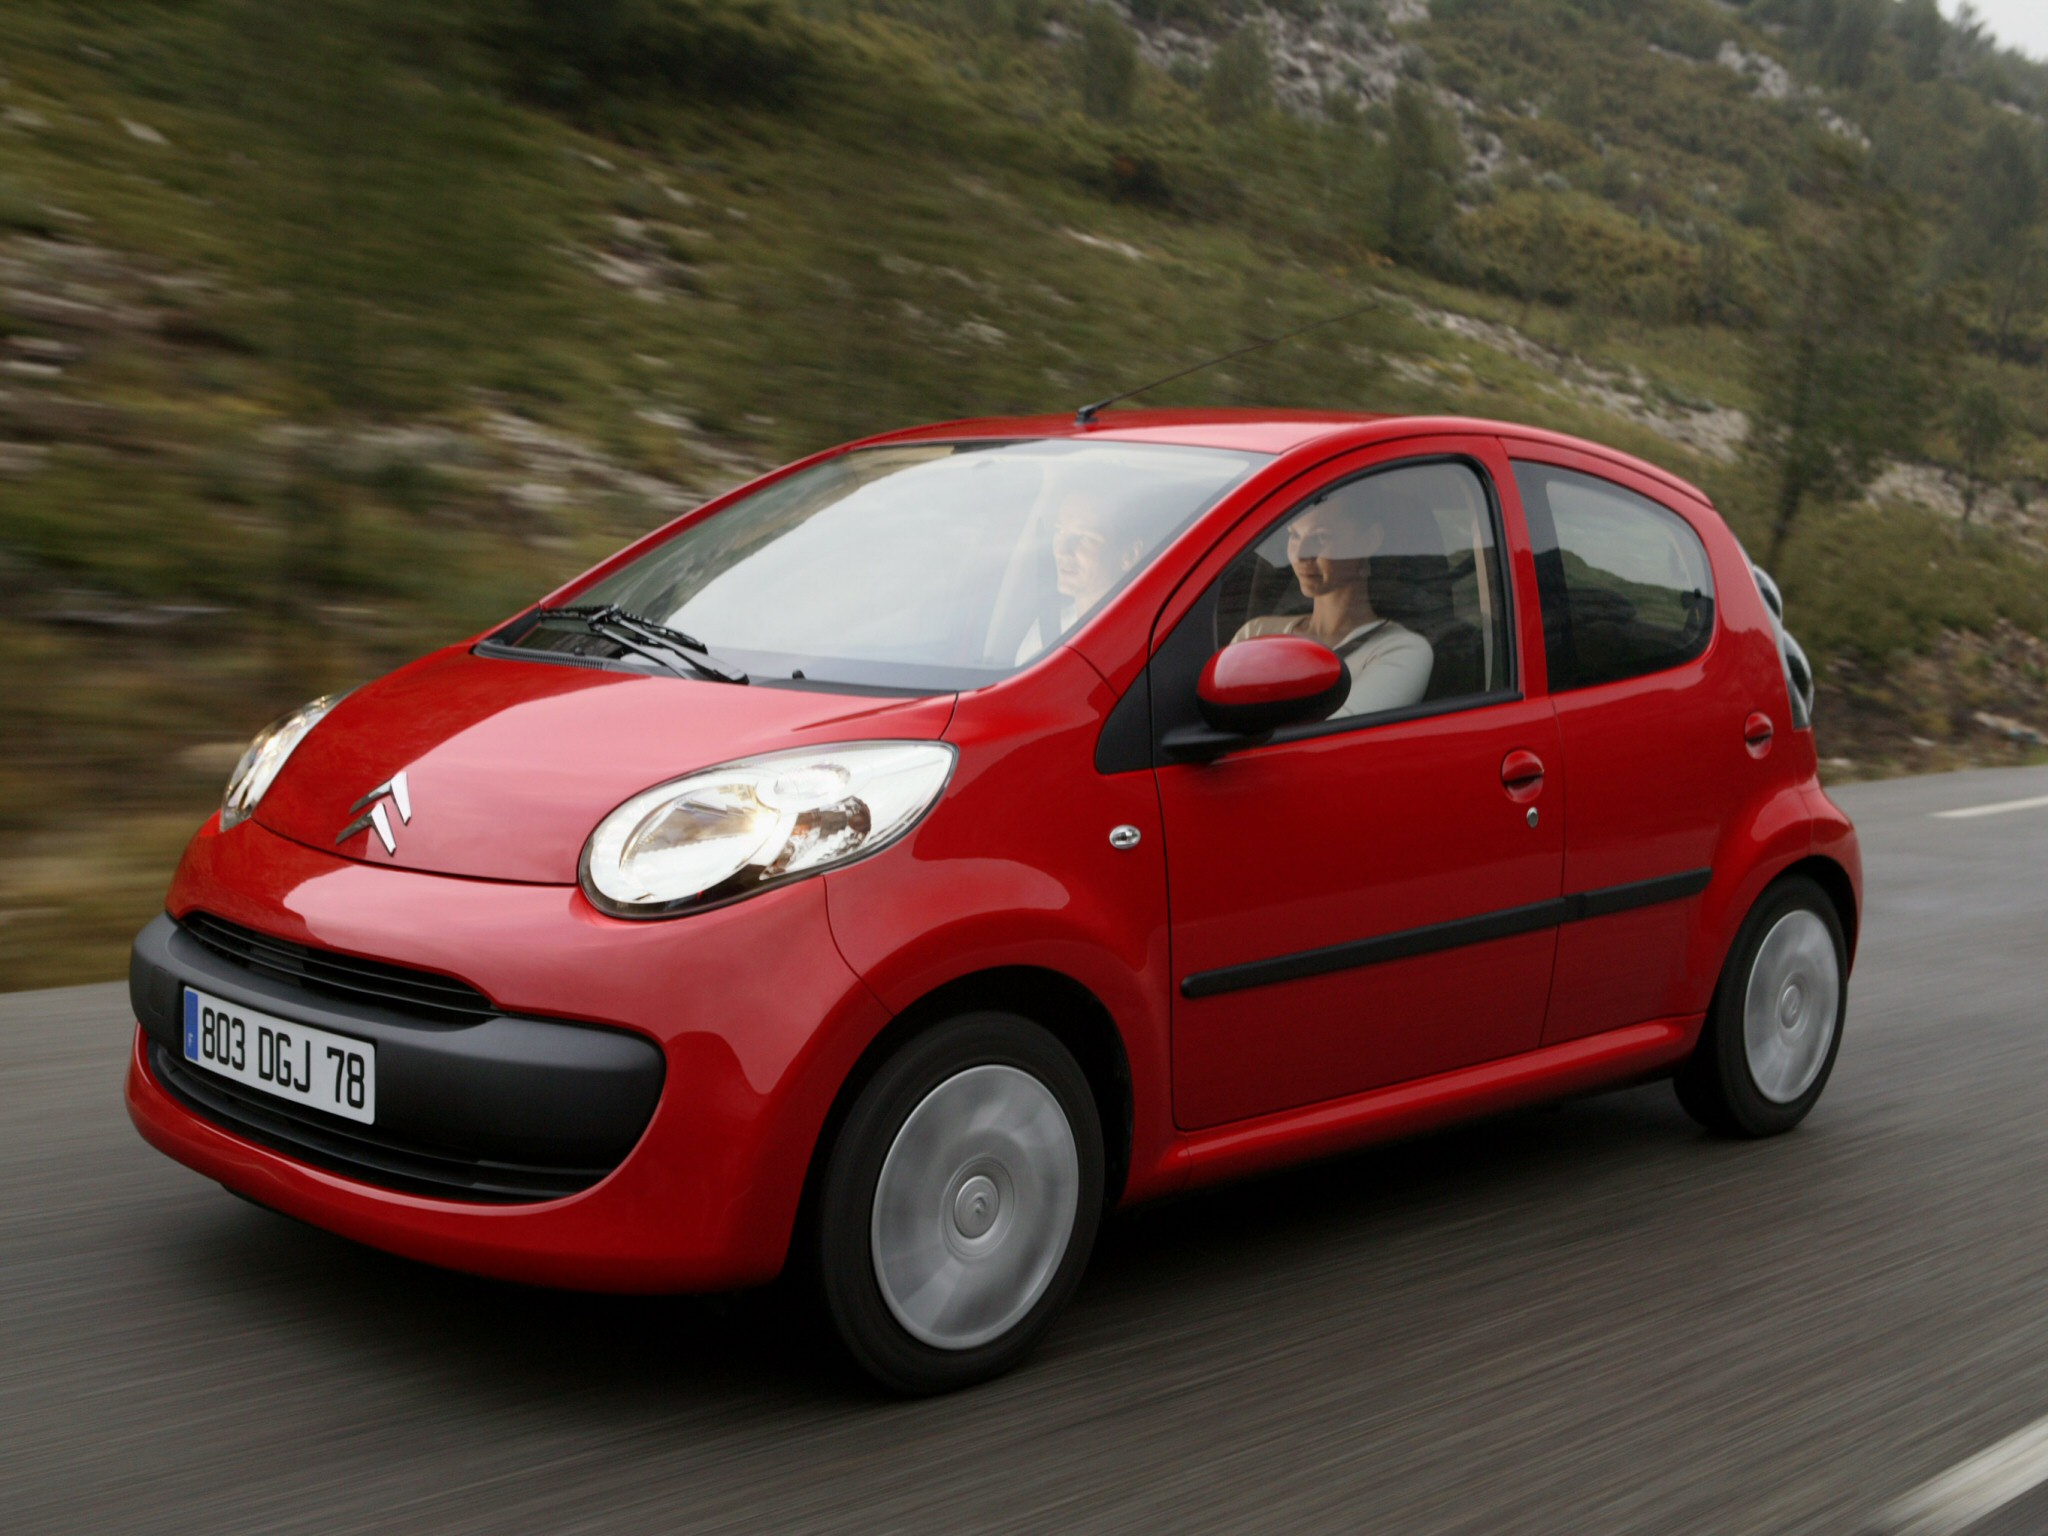 Car in pictures car photo gallery » Citroen C1 2006 Photo 25